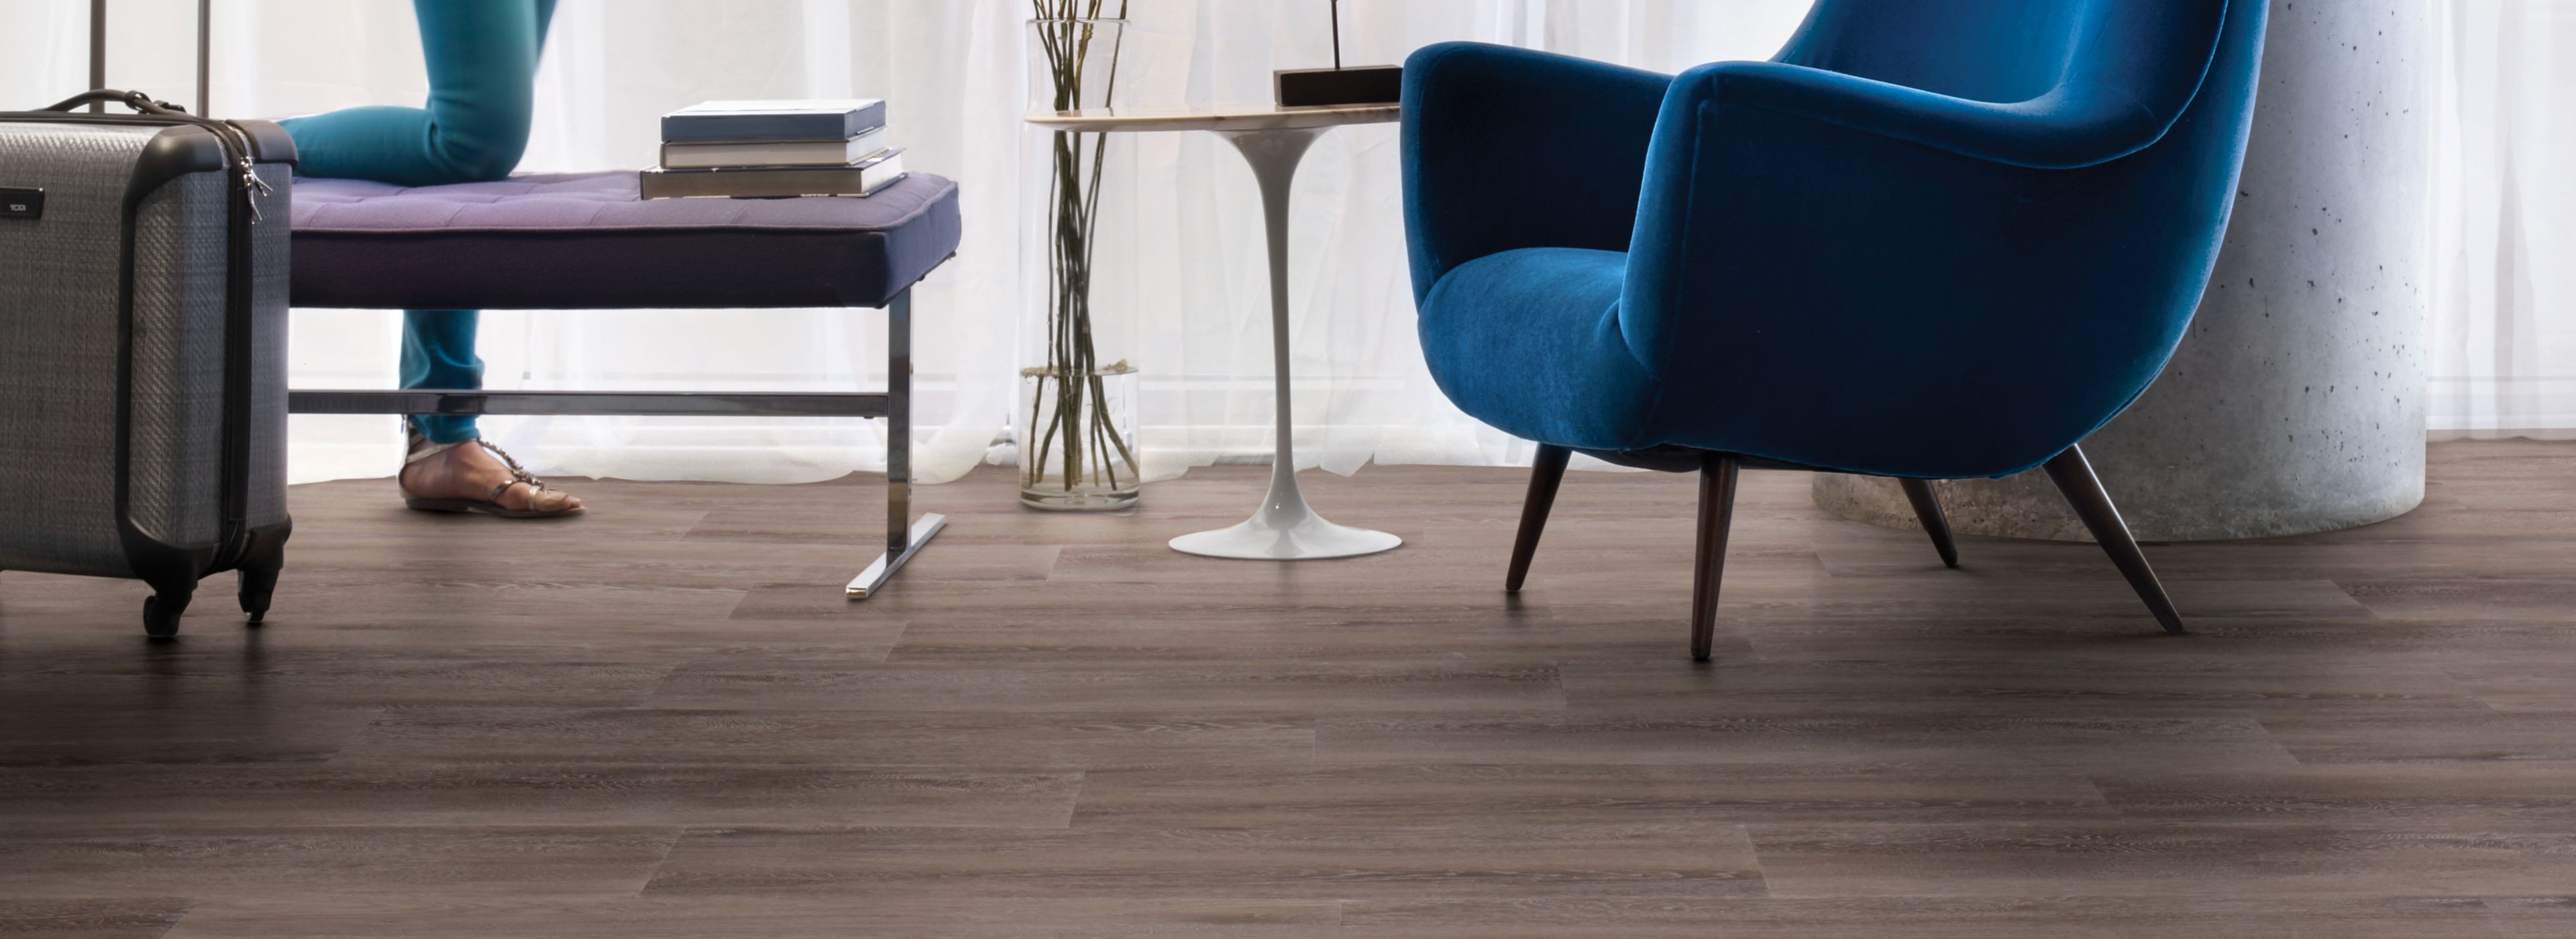 Interface Textured Woodgrains LVT in lobby setting with table and chair número de imagen 1